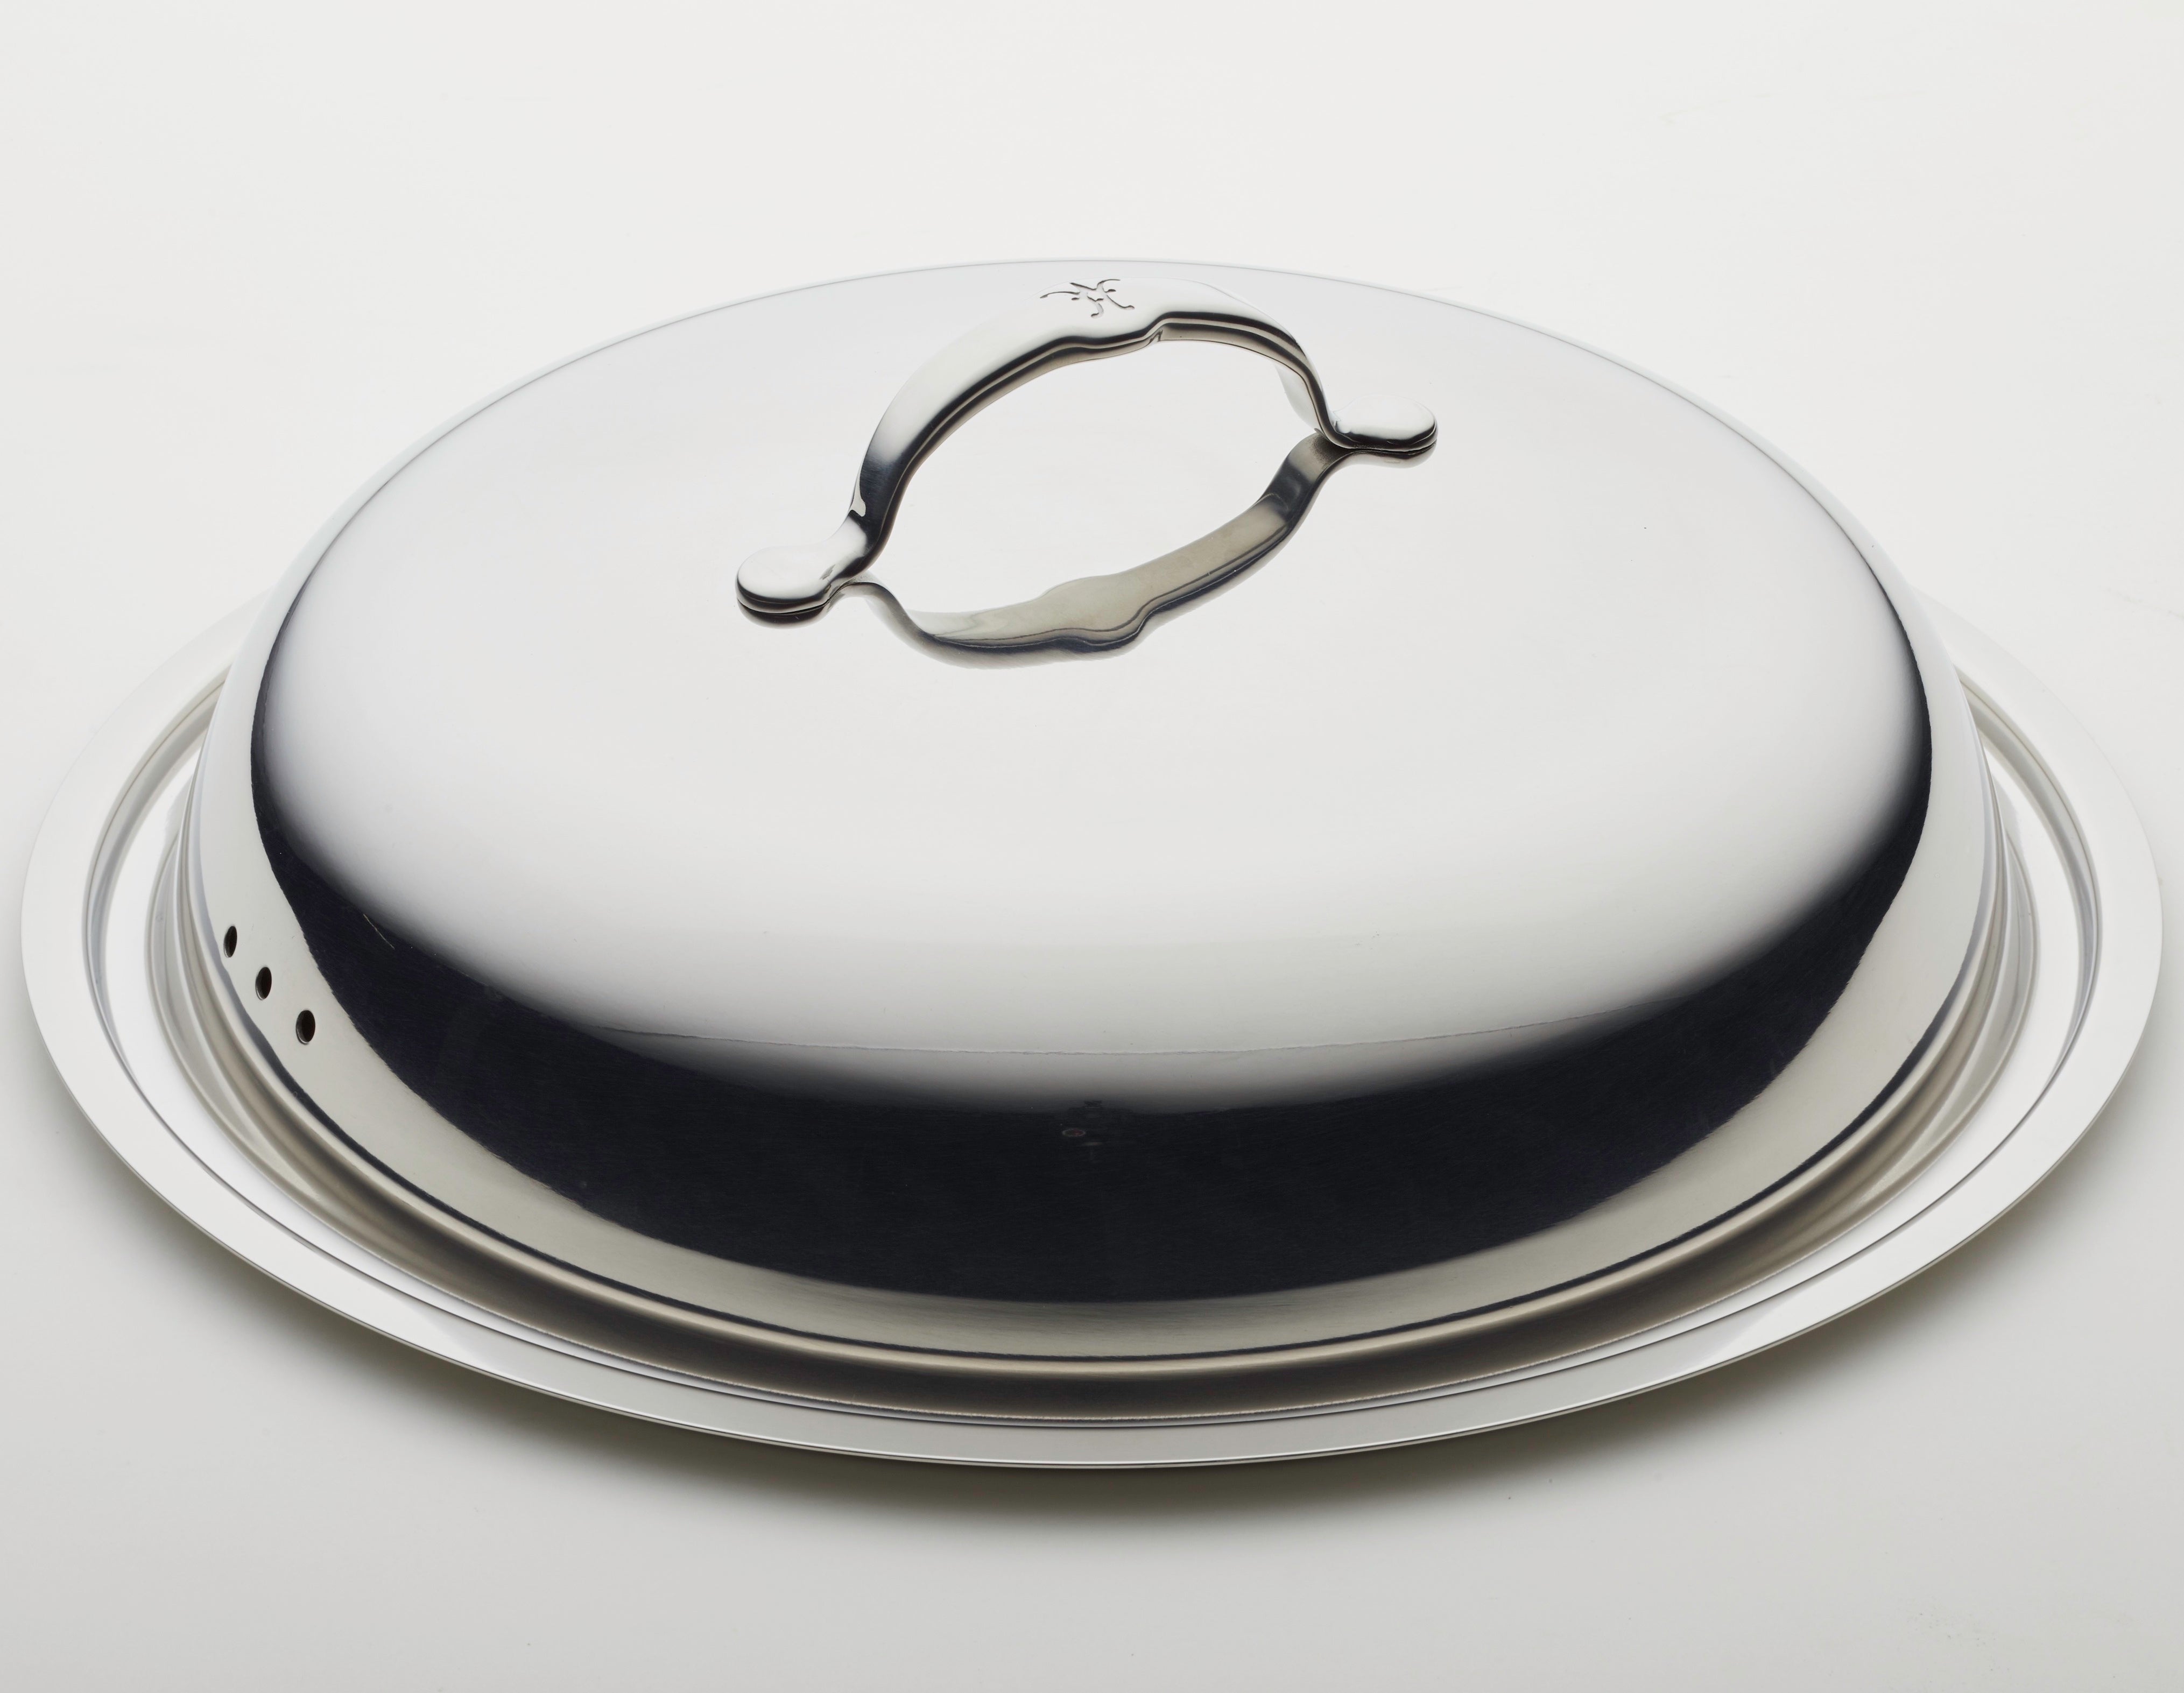 14 Stainless Steel Dome Lid – Hestan Culinary